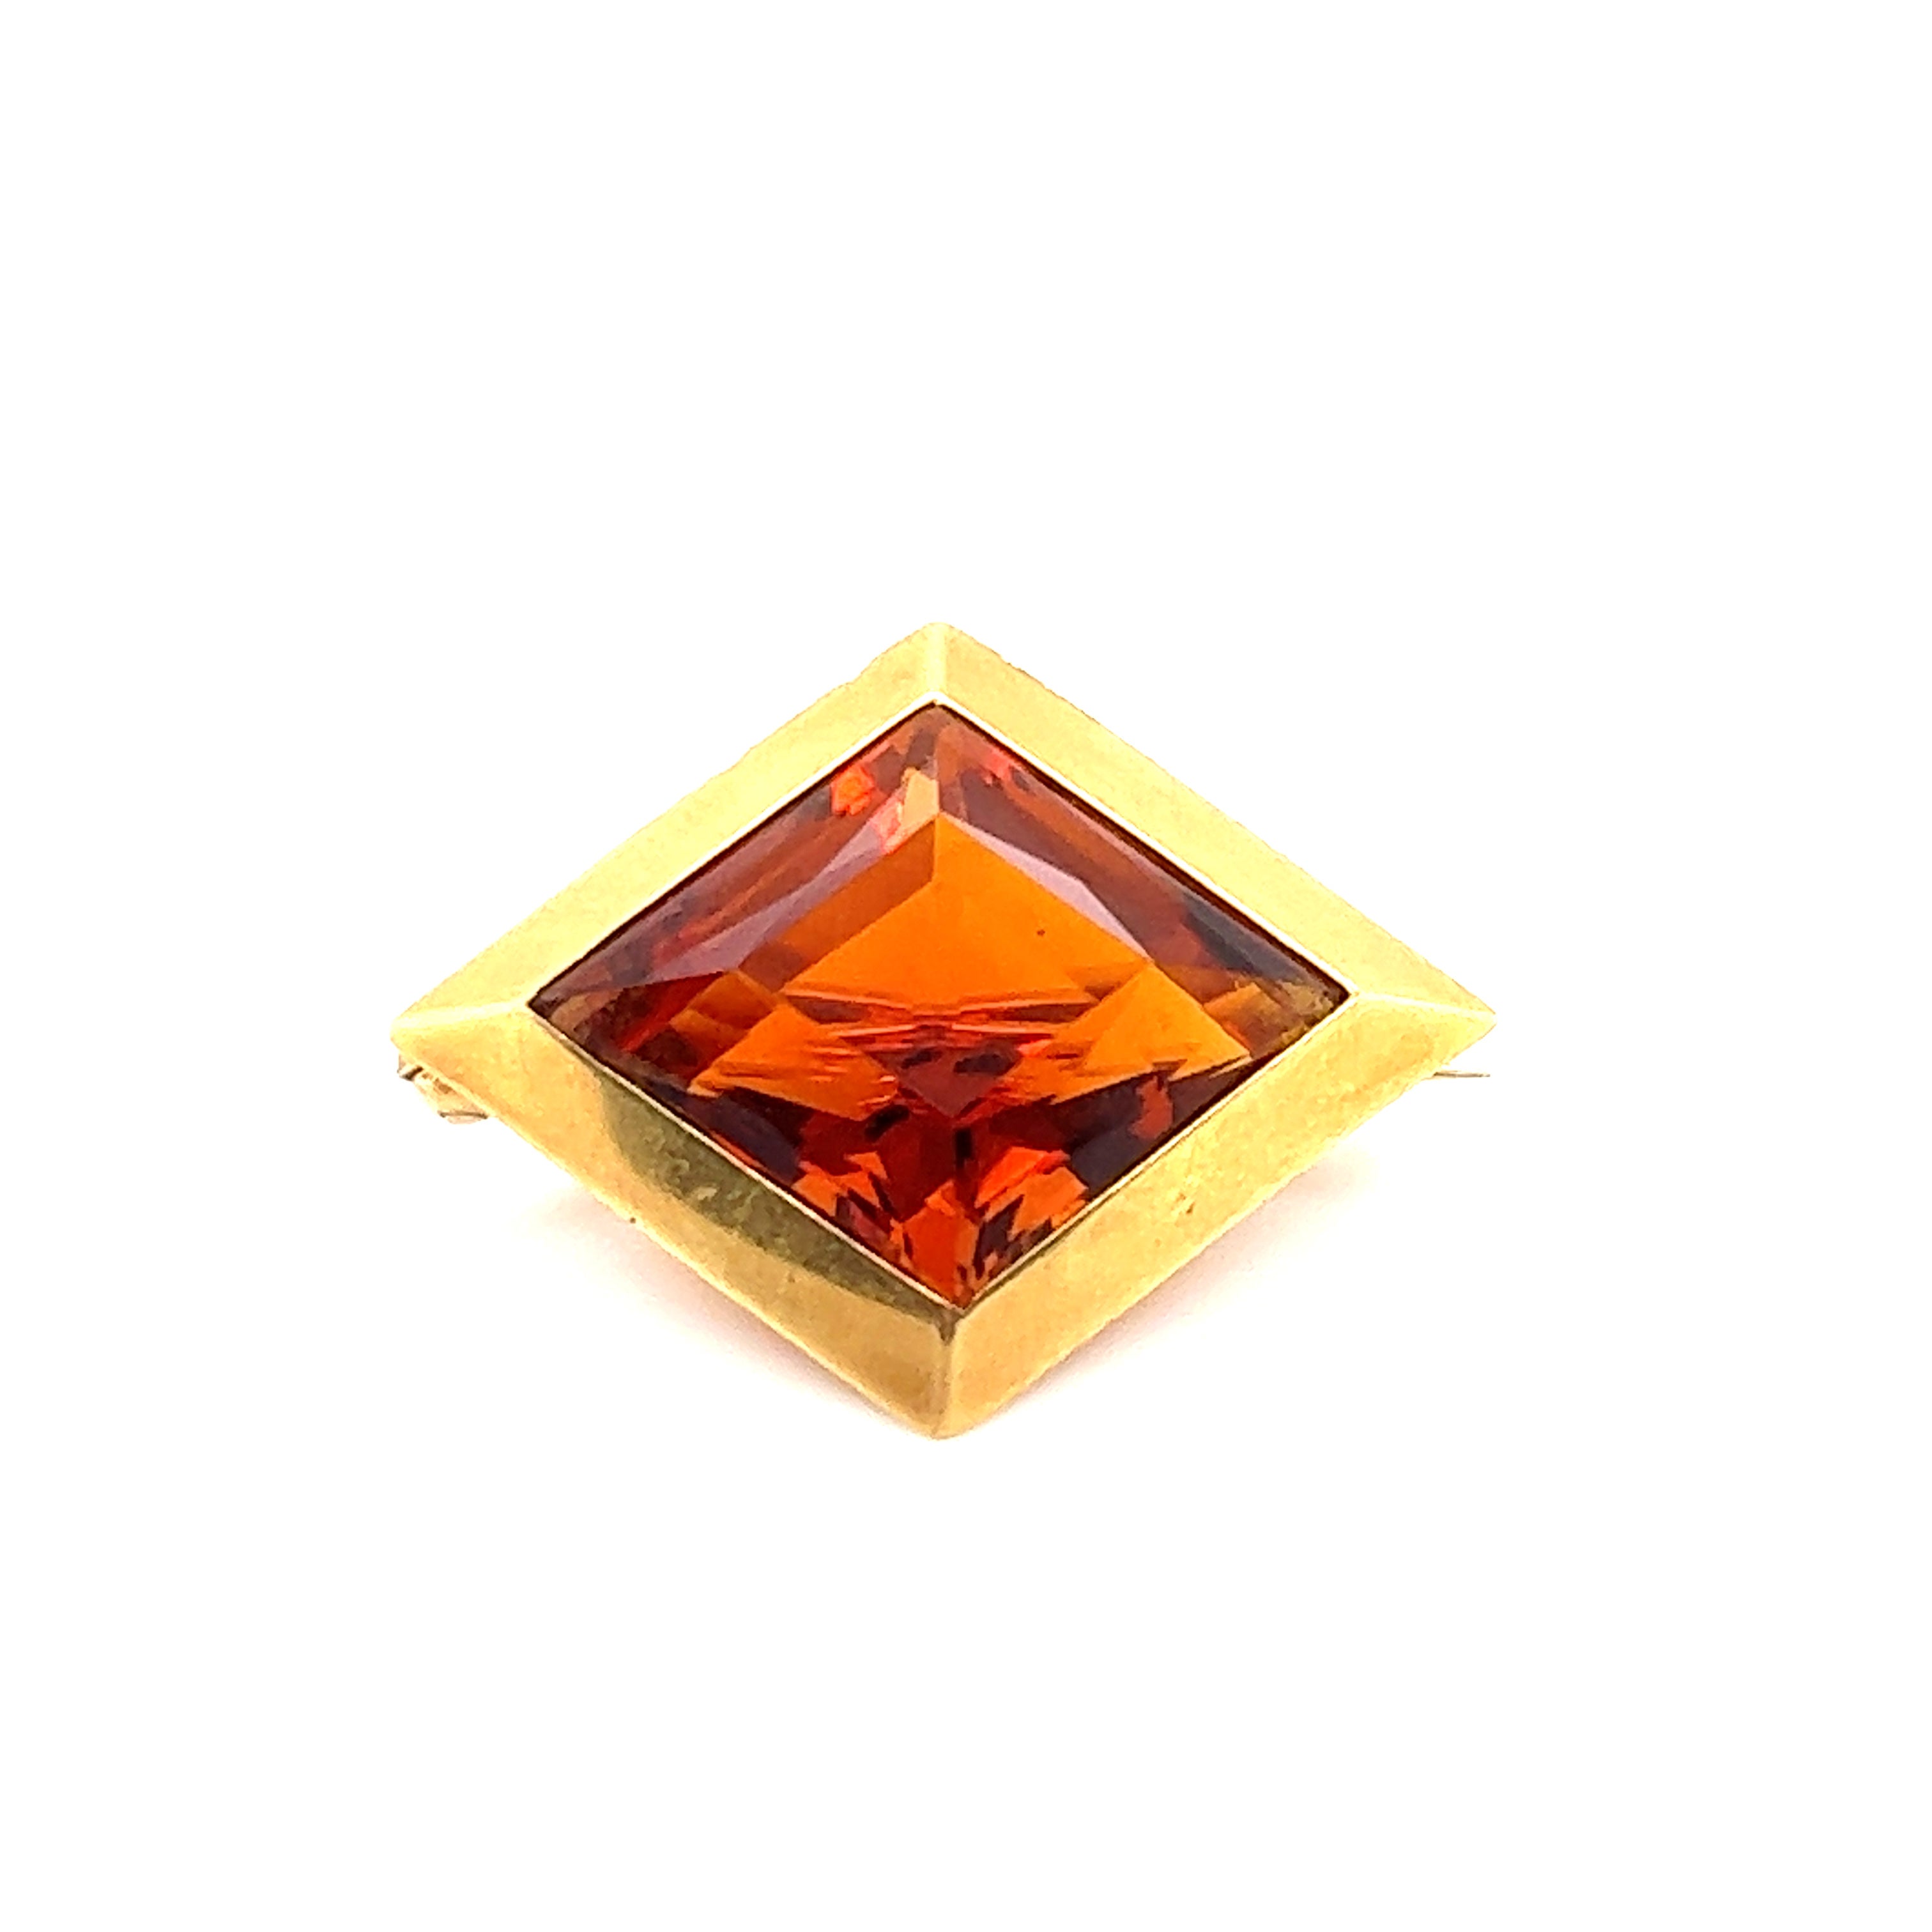 One geometric shaped shield brooch by famed jewelry house J.E. Caldwell & Co. The brooch is set with one Madeira Citrine gemstone in a lozenge shape. The gemstone is bezel set in the design showing sharp edges at each corner. The 18k gold border